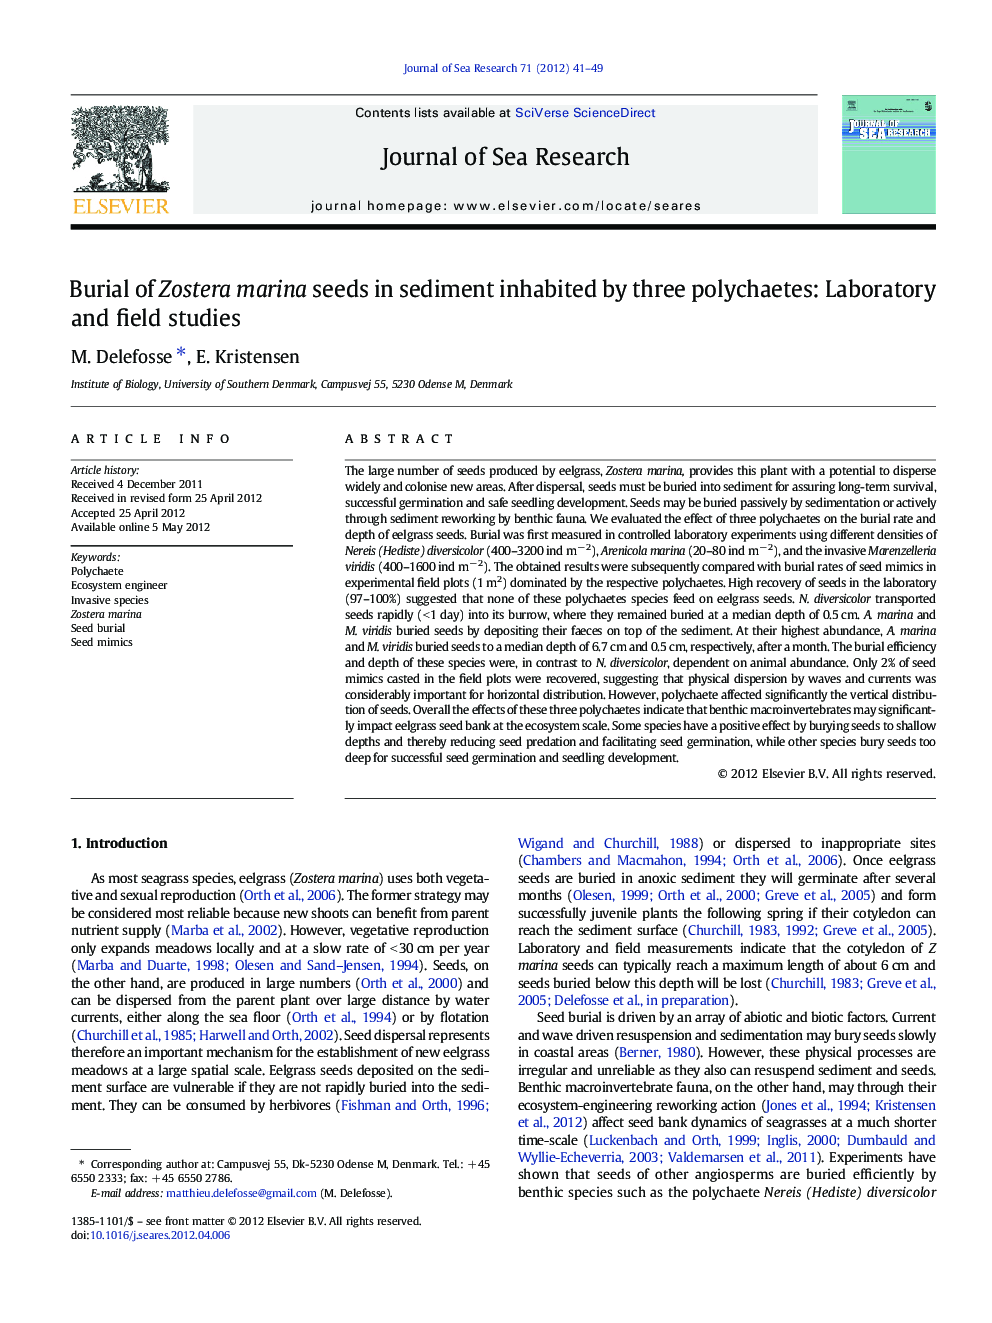 Burial of Zostera marina seeds in sediment inhabited by three polychaetes: Laboratory and field studies